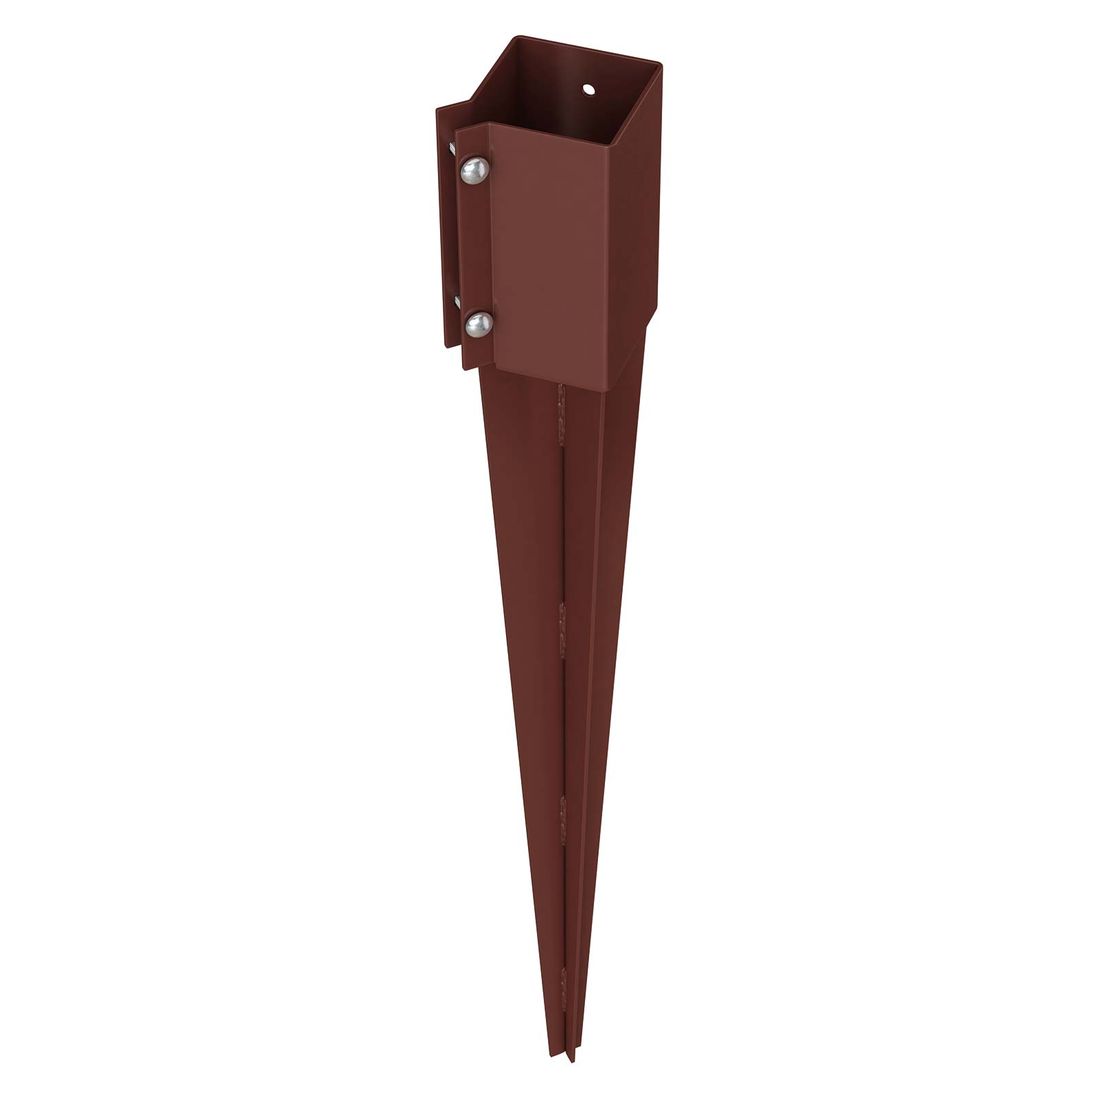 Powapost Dps Drive-In Fence 100Mm Post Spike 750Mm